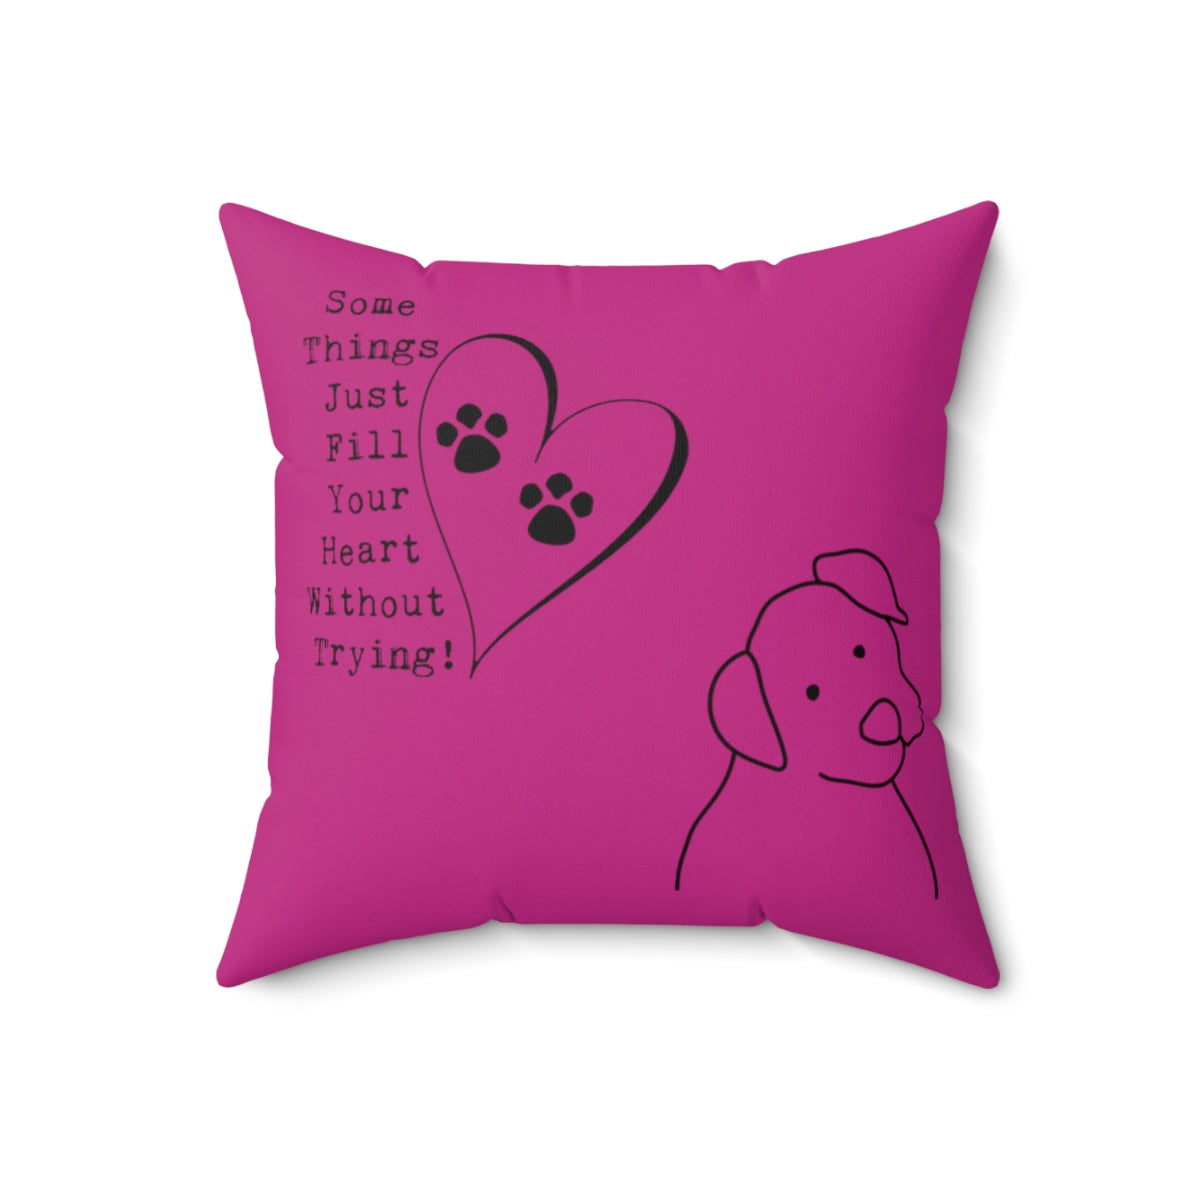 Pink Square Pillow Case - Some Things Fill Your Heart Without Trying - Home Decor Pillow Cover - Accent Pillow Cover